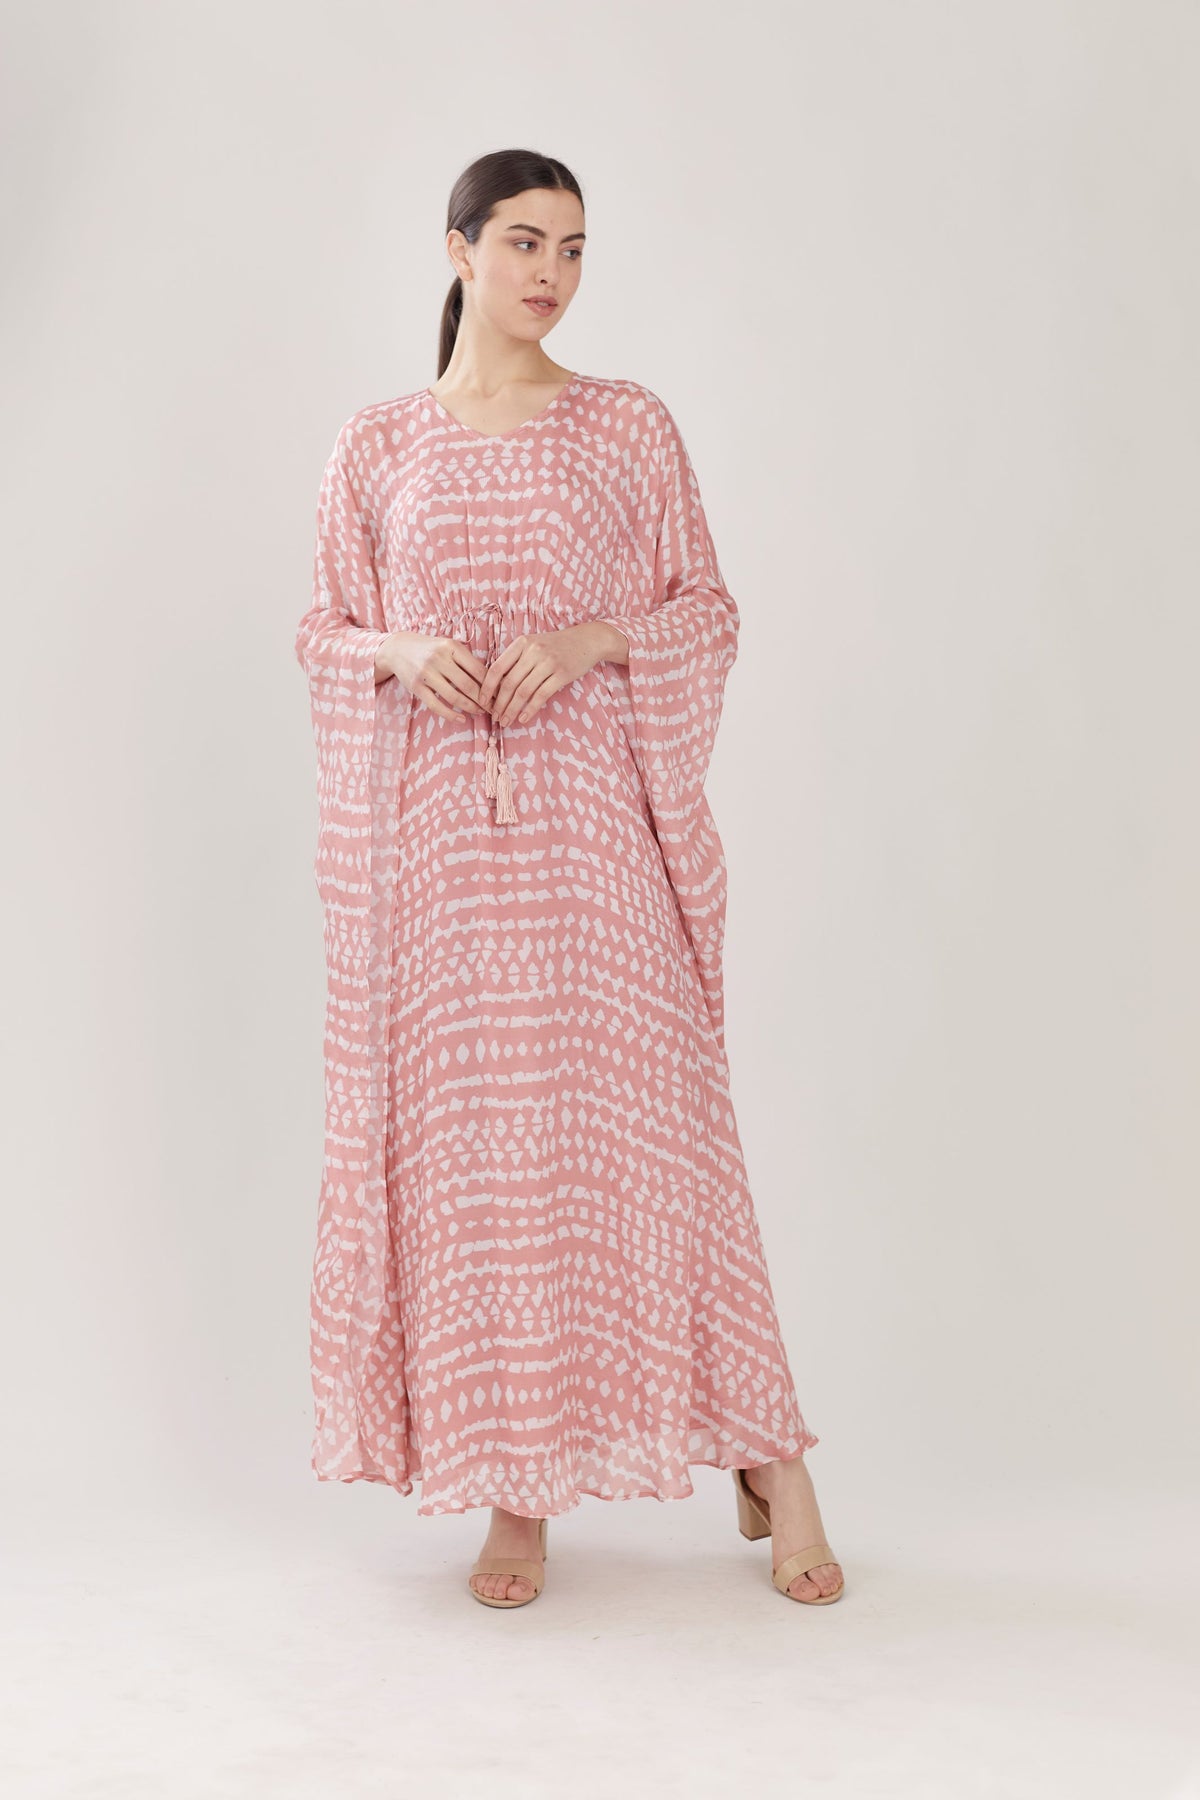 PINK AND WHITE ABSTRACT KAFTAN